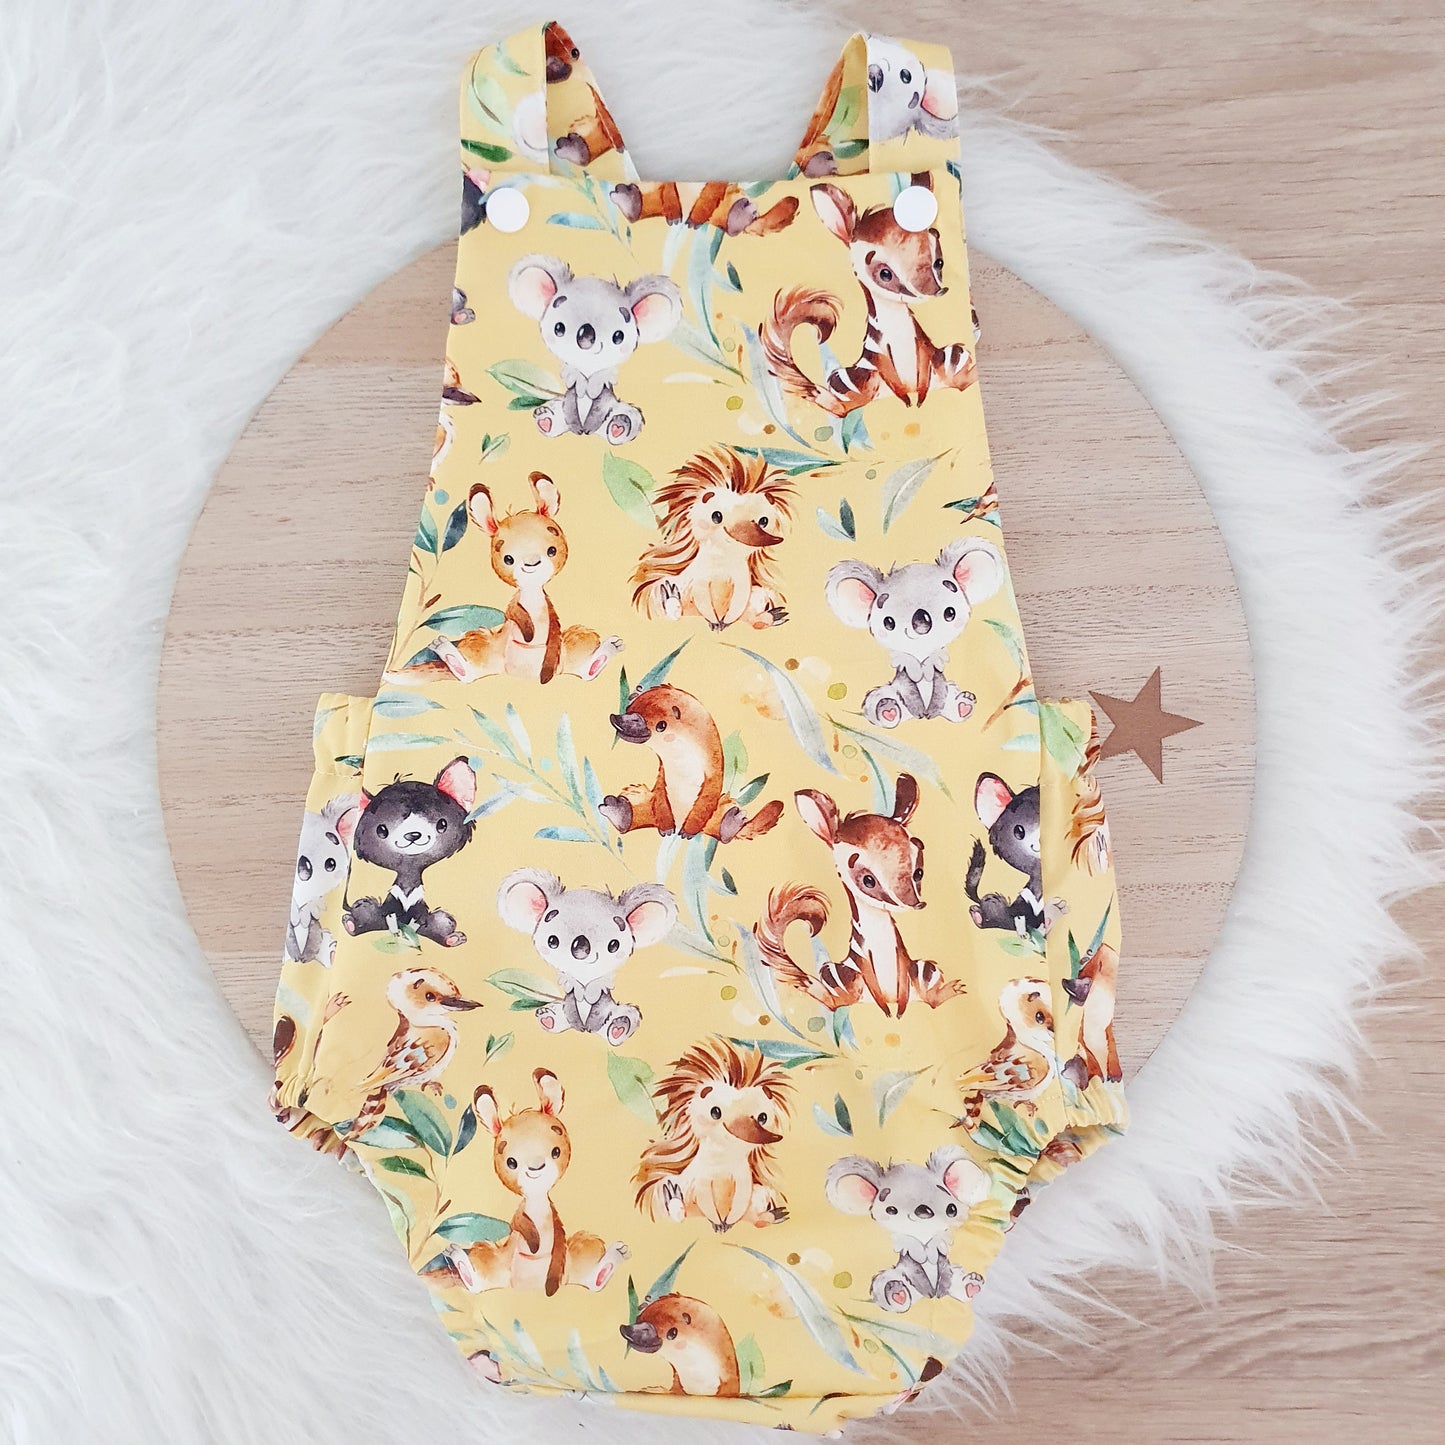 AUSSIE ANIMALS print Baby Romper, Handmade Baby Clothing, Size 0 - 1st Birthday Clothing / Cake Smash Outfit, 9 - 12 months